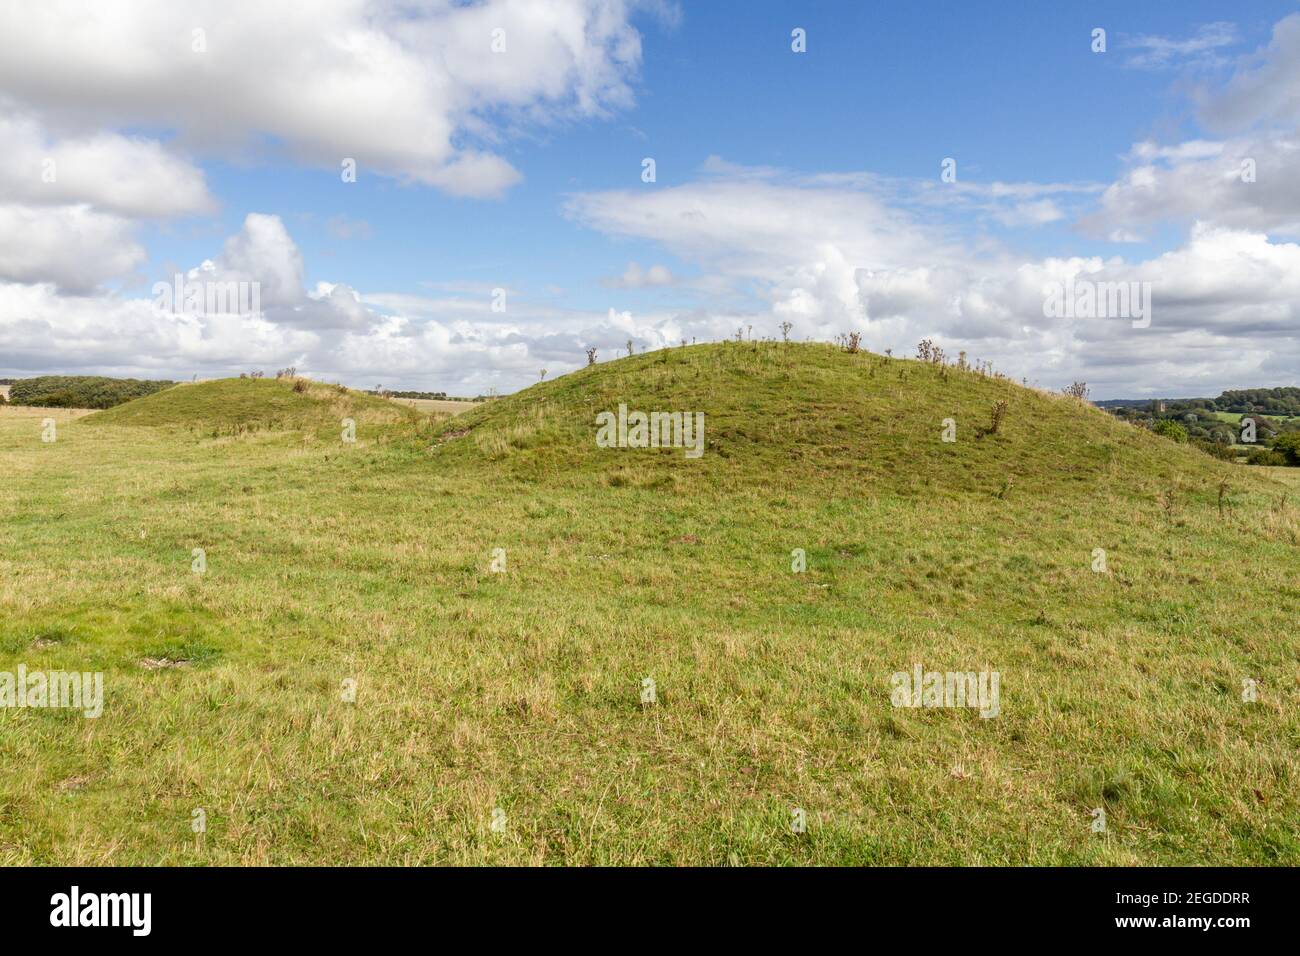 Early Bronze Age round barrows (mounds) close to the Sanctuary, a ceremonial monument, Wiltshire, England. Stock Photo